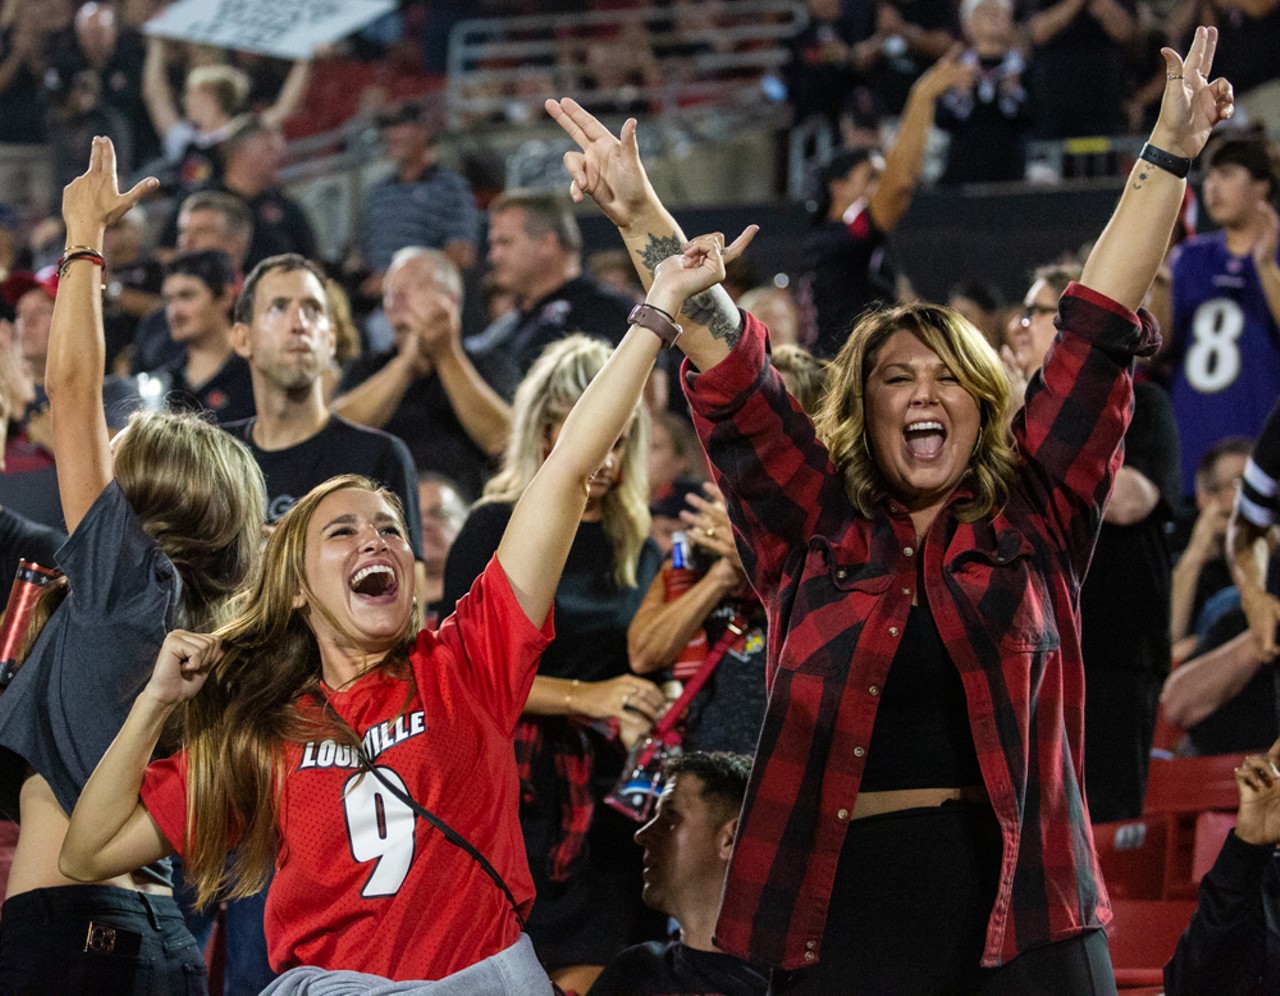 PHOTOS: UofL Beats Murray State 56-0 In Football Home Opener